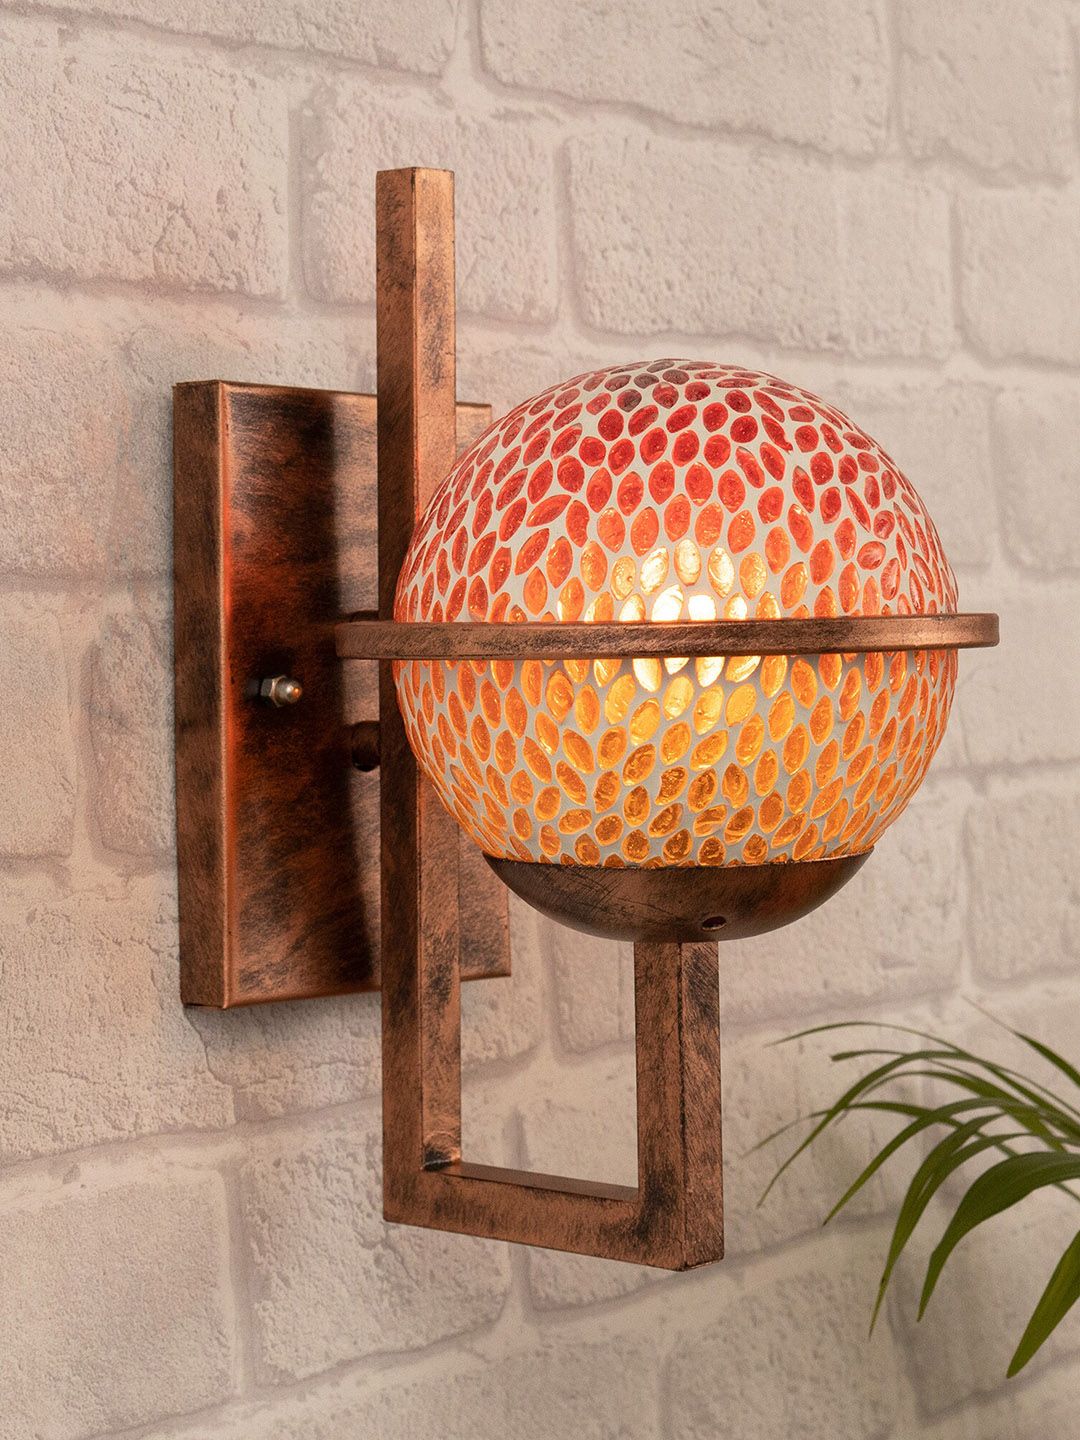 Homesake Copper-Toned Rustic Oil Rubbed Glass Wall Lamp Price in India